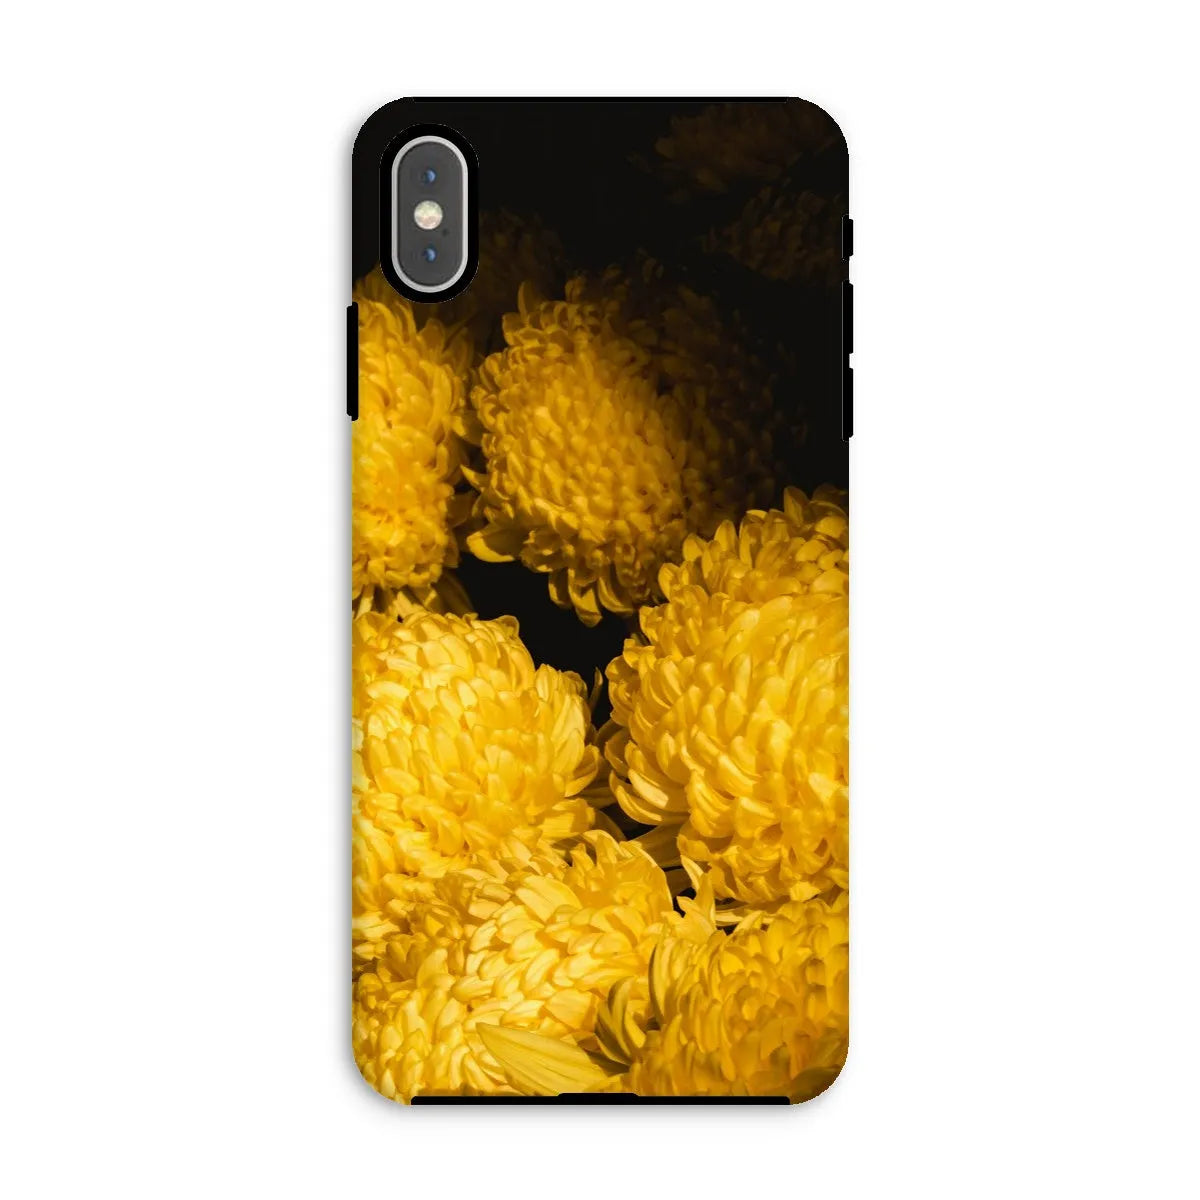 Field Of Dreams Tough Phone Case - Iphone Xs Max / Matte - Mobile Phone Cases - Aesthetic Art